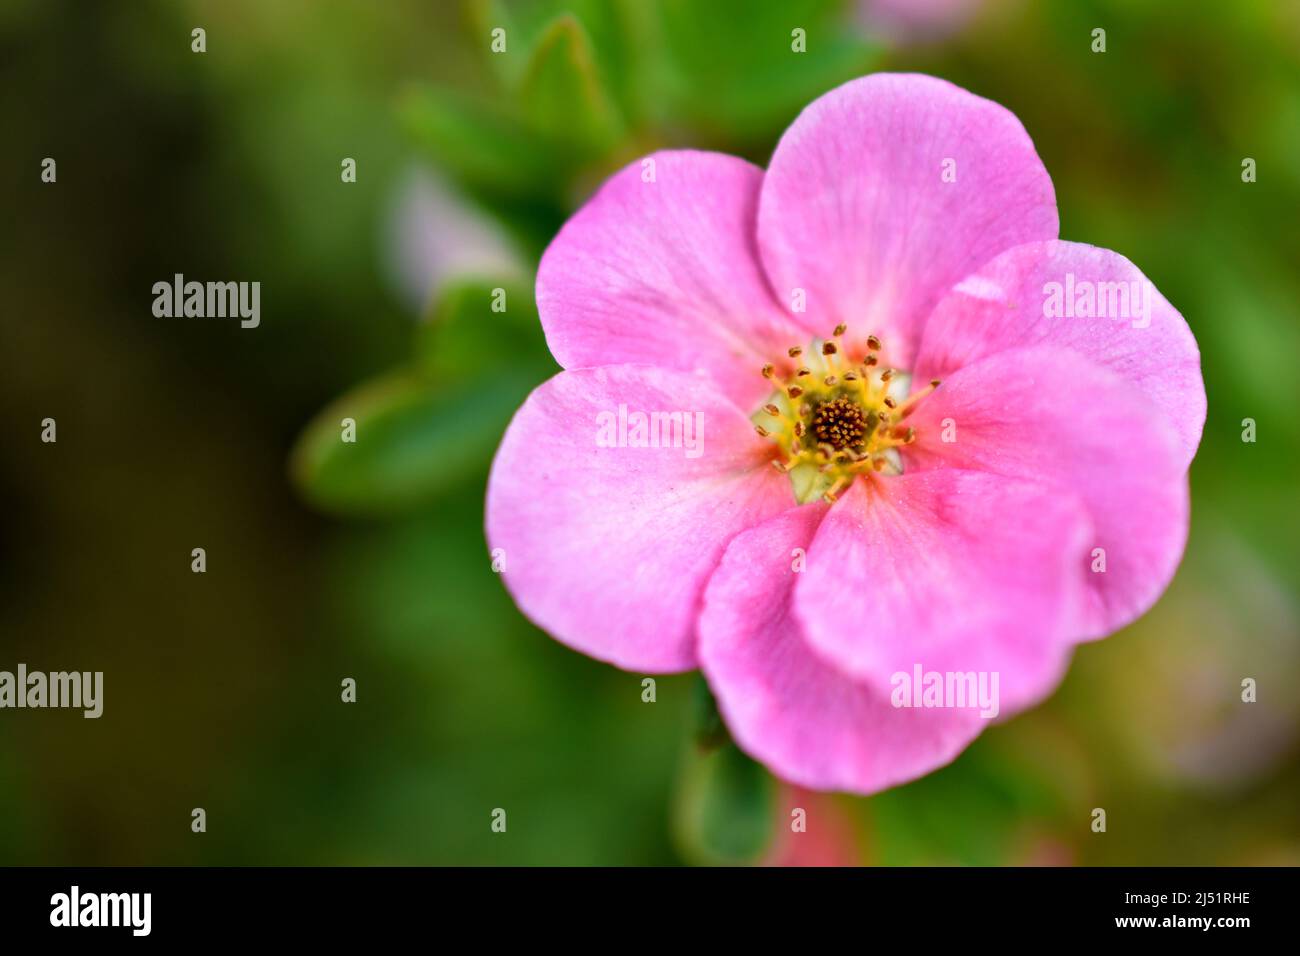 Pink flowers of Potentilla reptans close-up Stock Photo